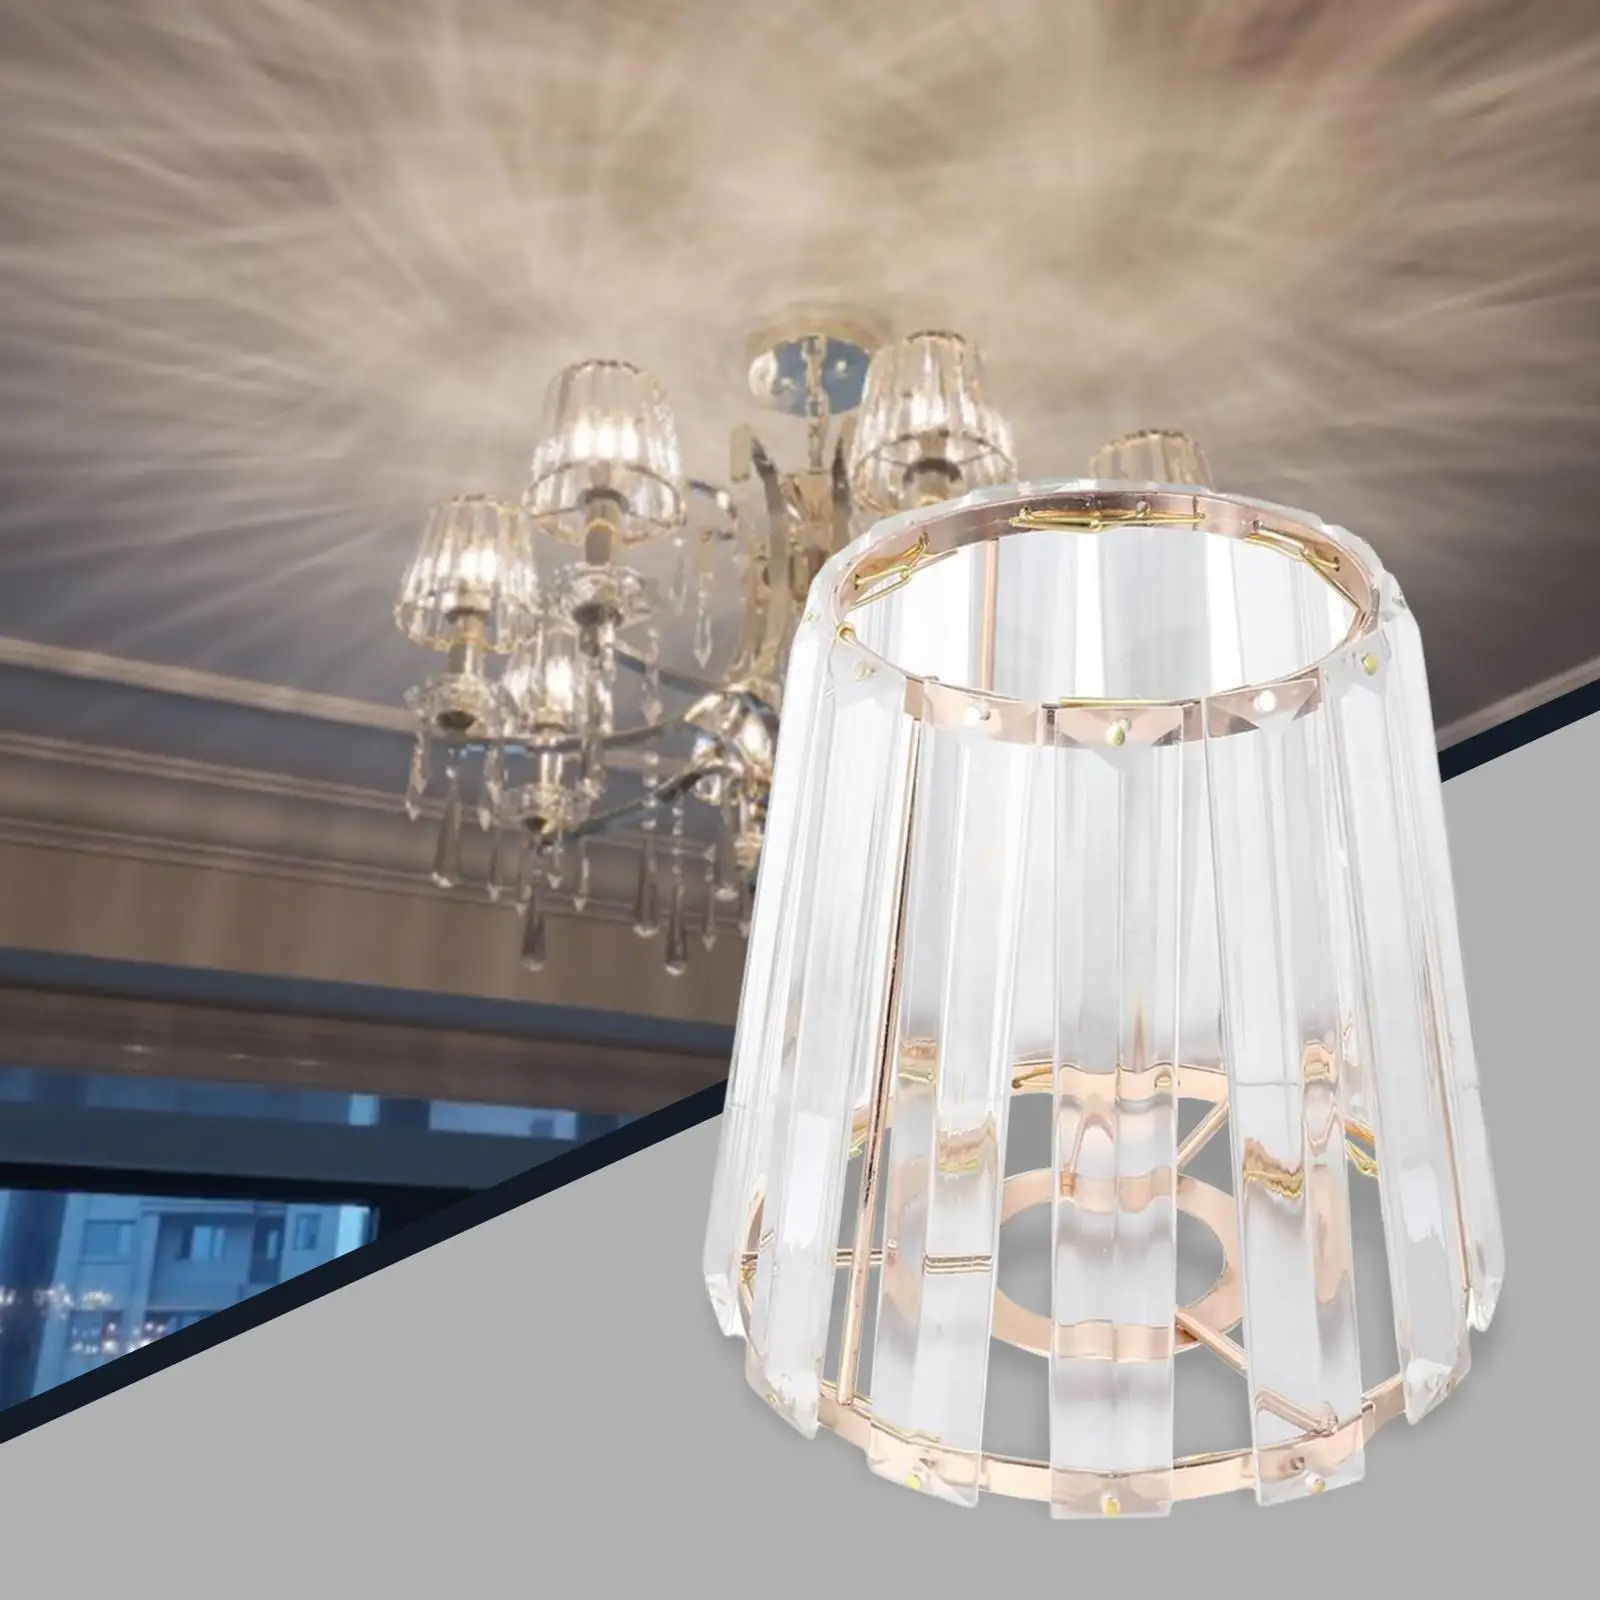 Exquisite Lamp Shade Chandelier Table Lamp Shades Decorative Lamp Cover